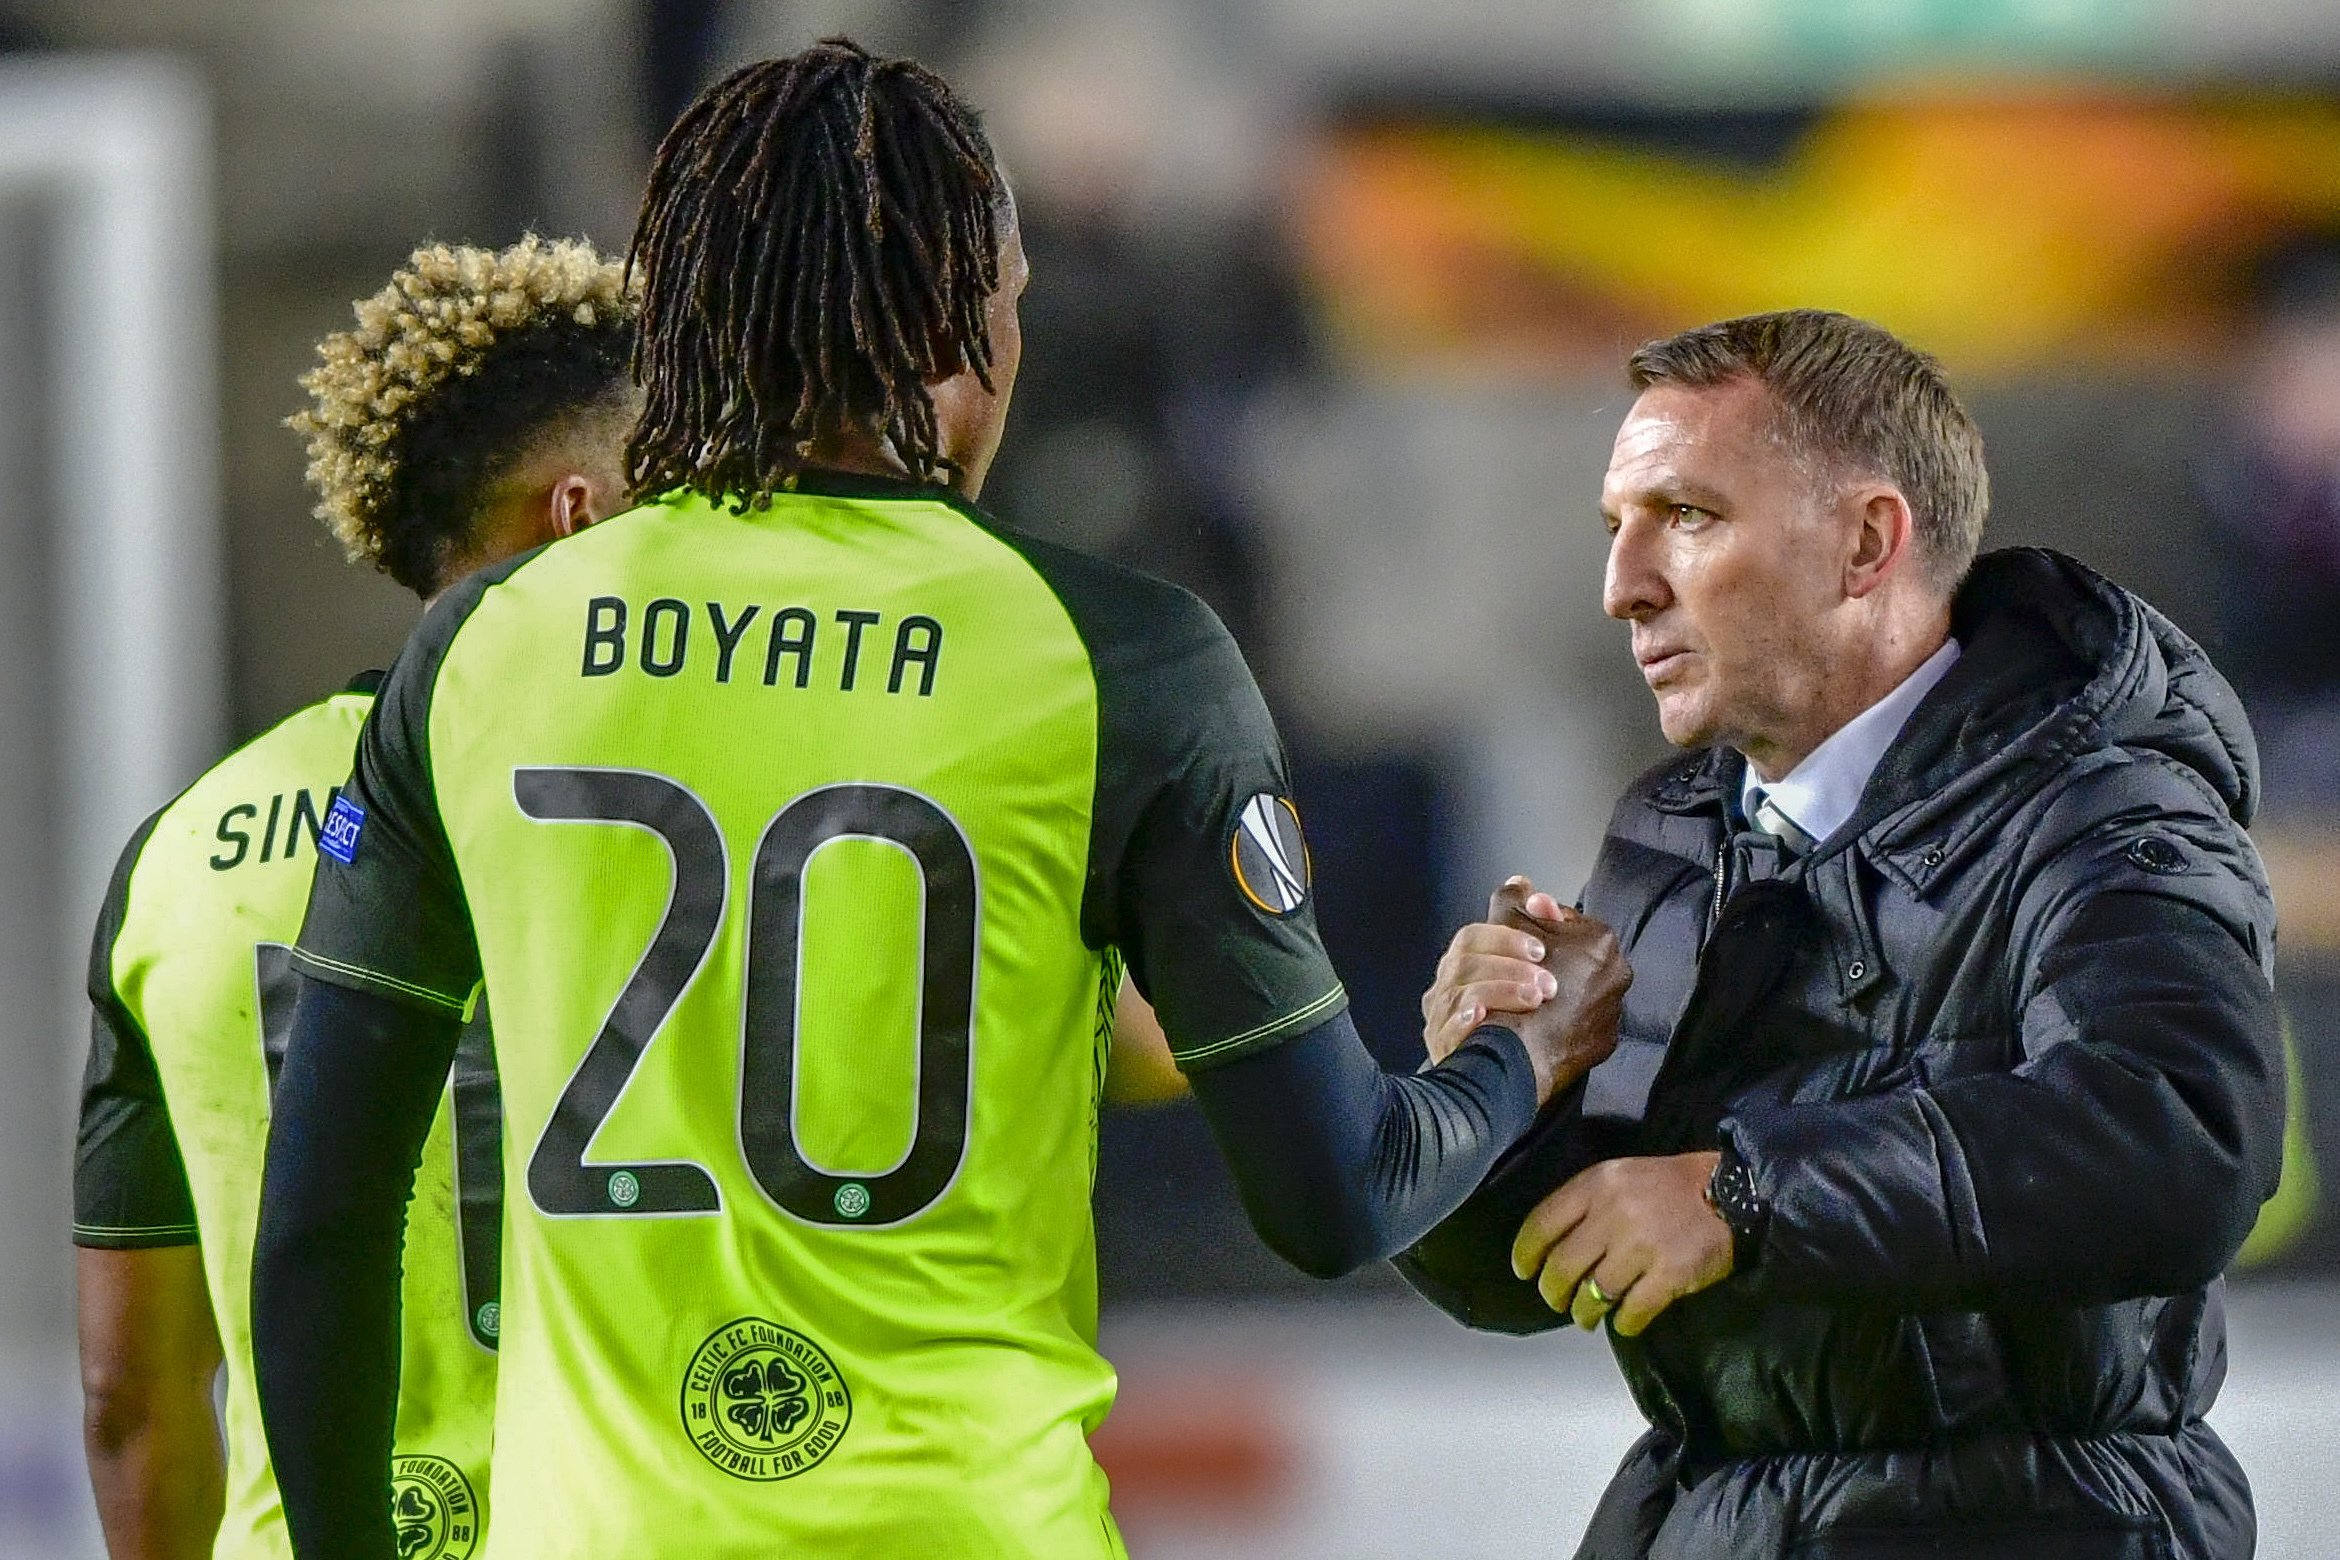 Brendan Rodgers congratulates his players after the match (Ole Martin Wold/NTB Scanpix via AP)